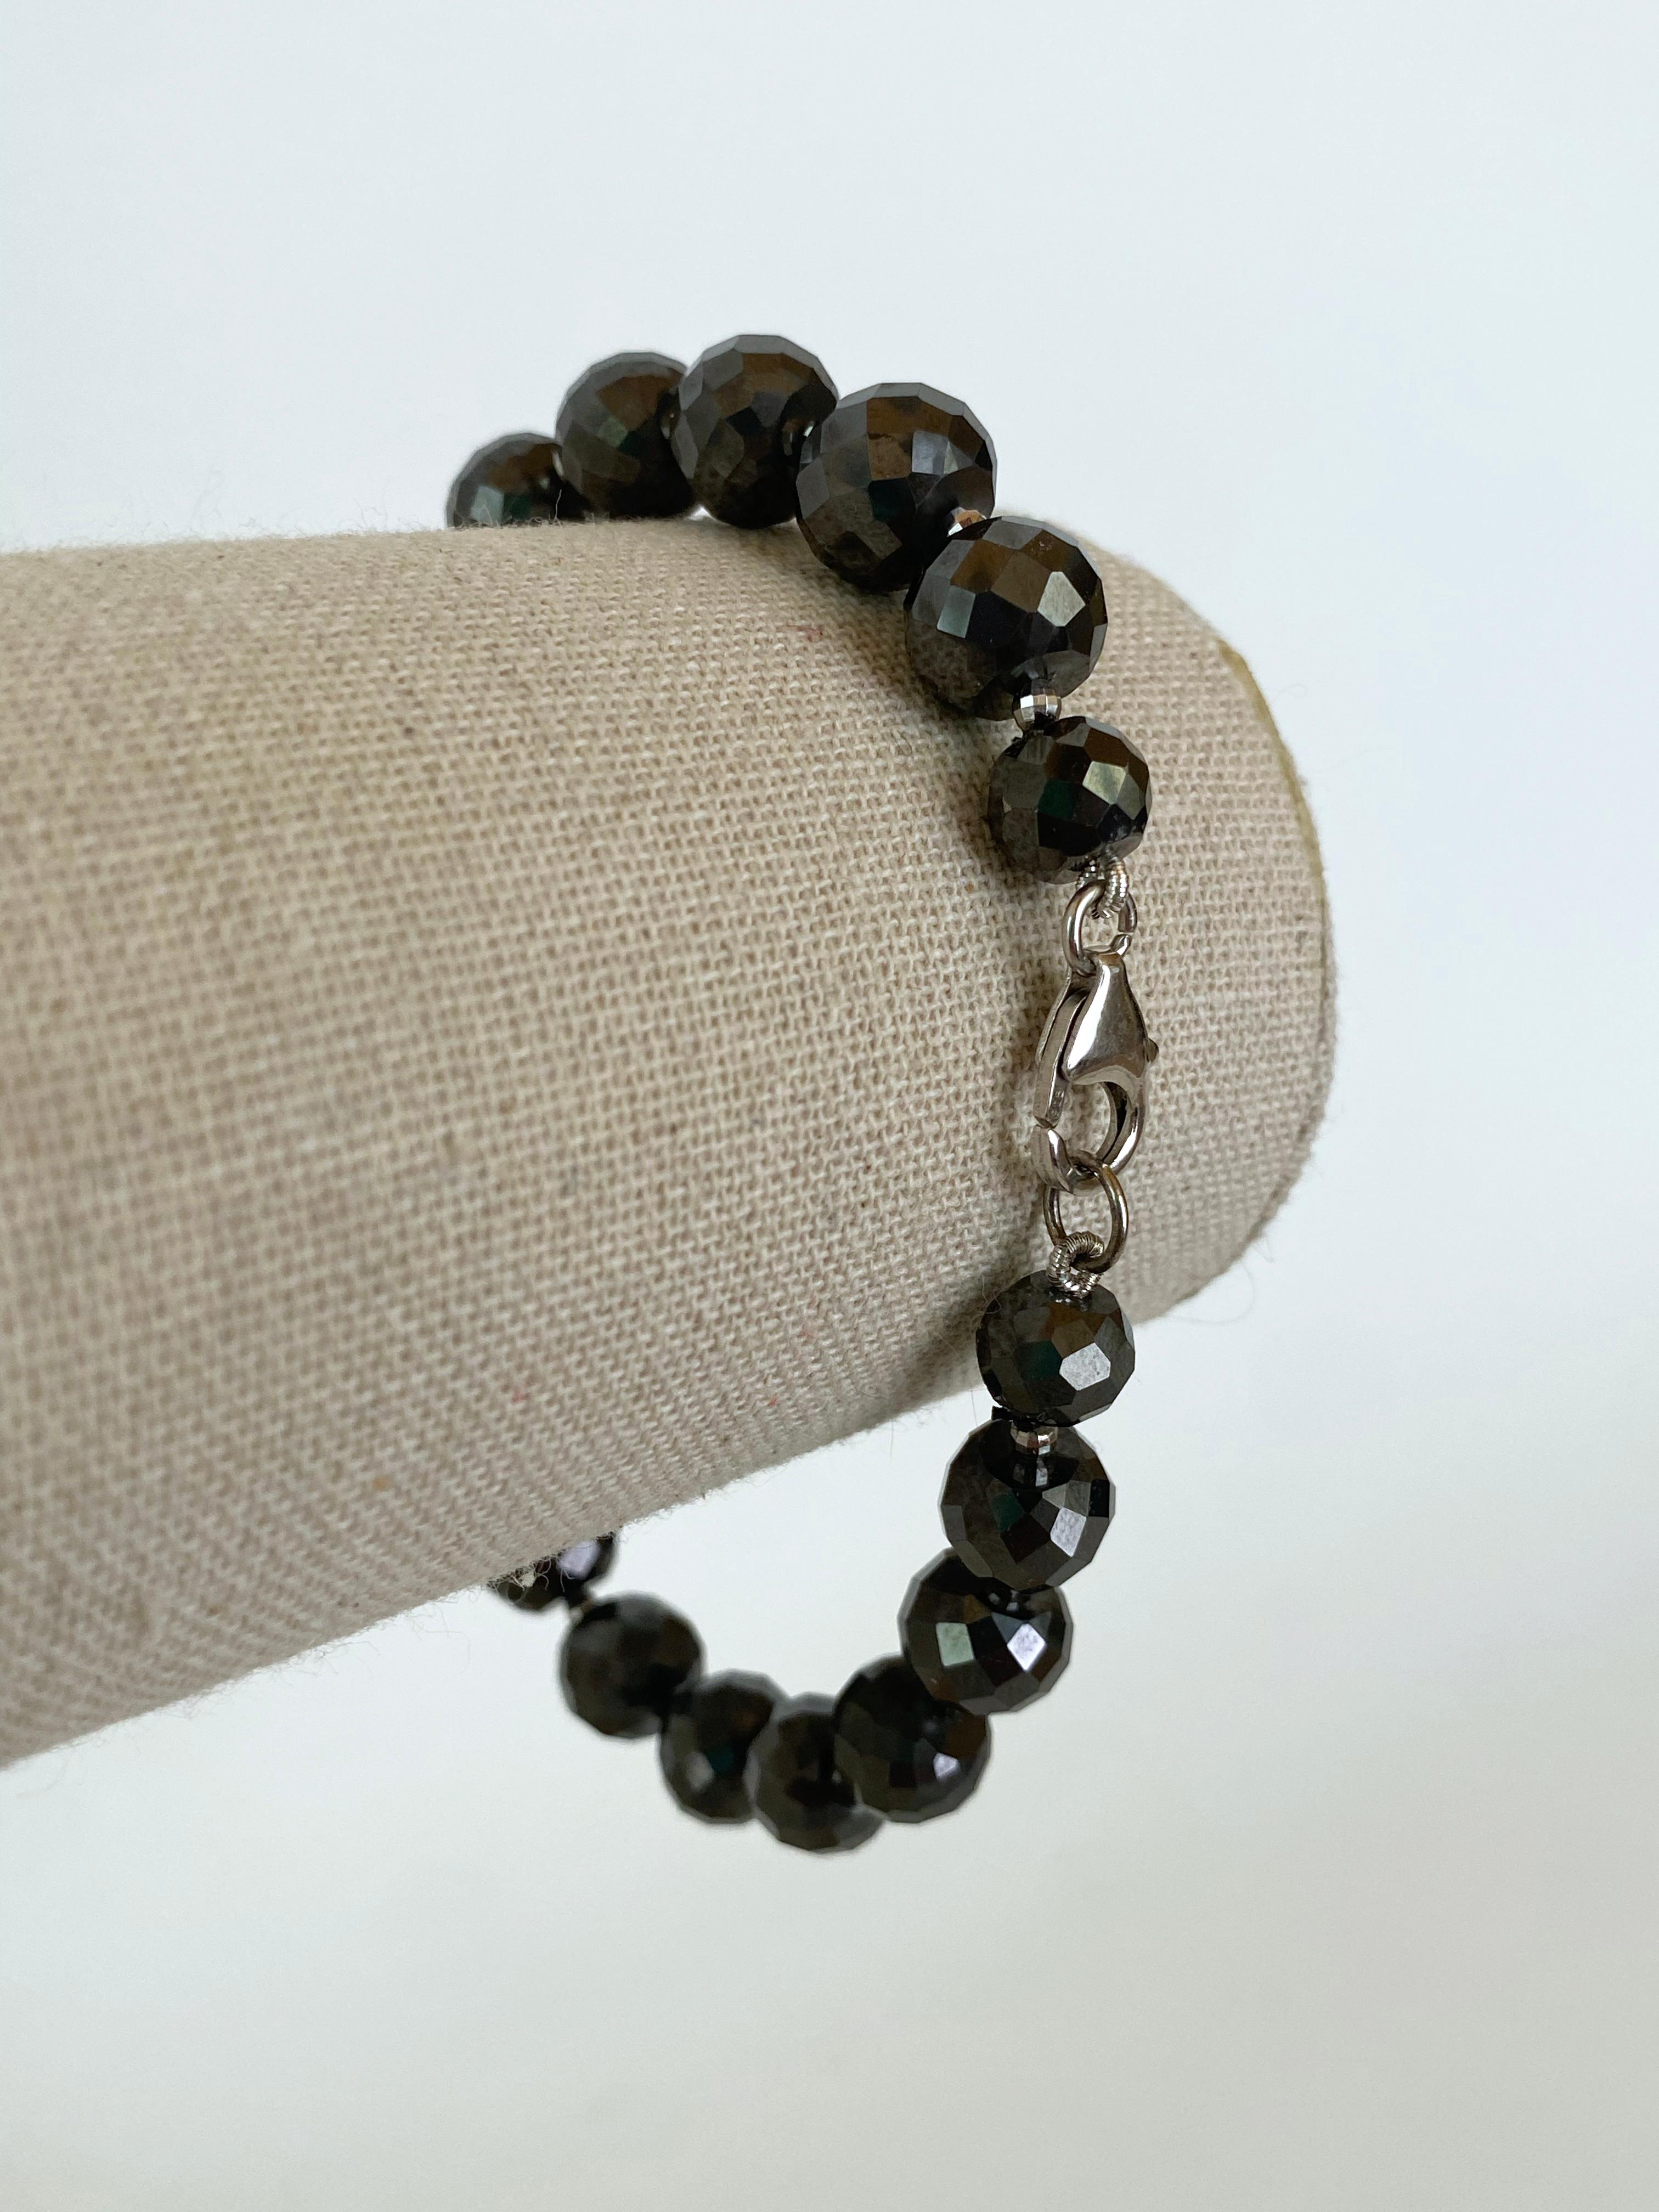 Artisan Marina J. Men's Bracelet with Black Spinel & Faceted Silver Rhodium Beads For Sale